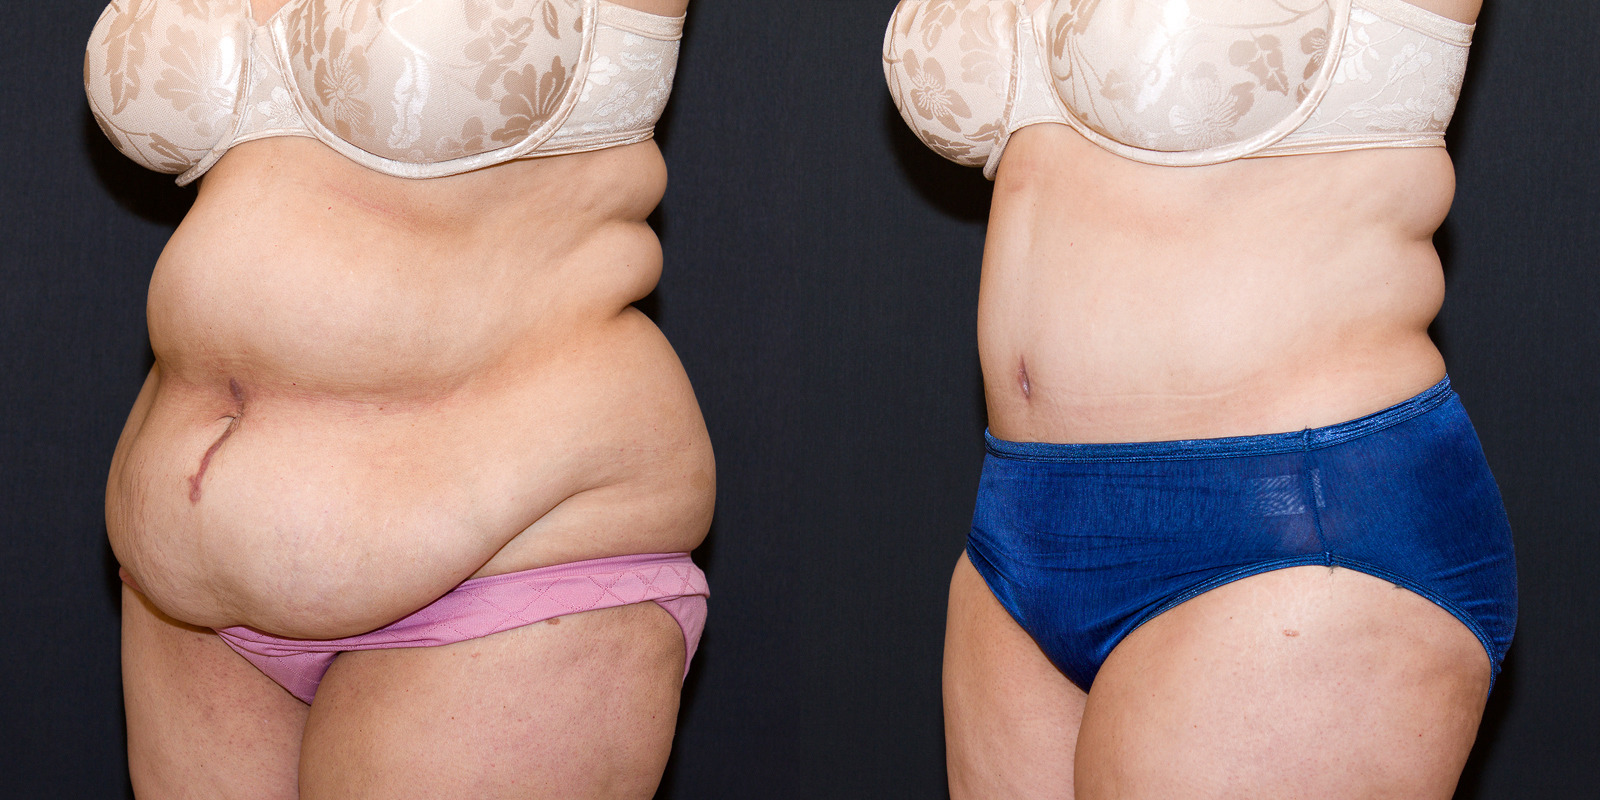 tummy tuck before and after weight loss